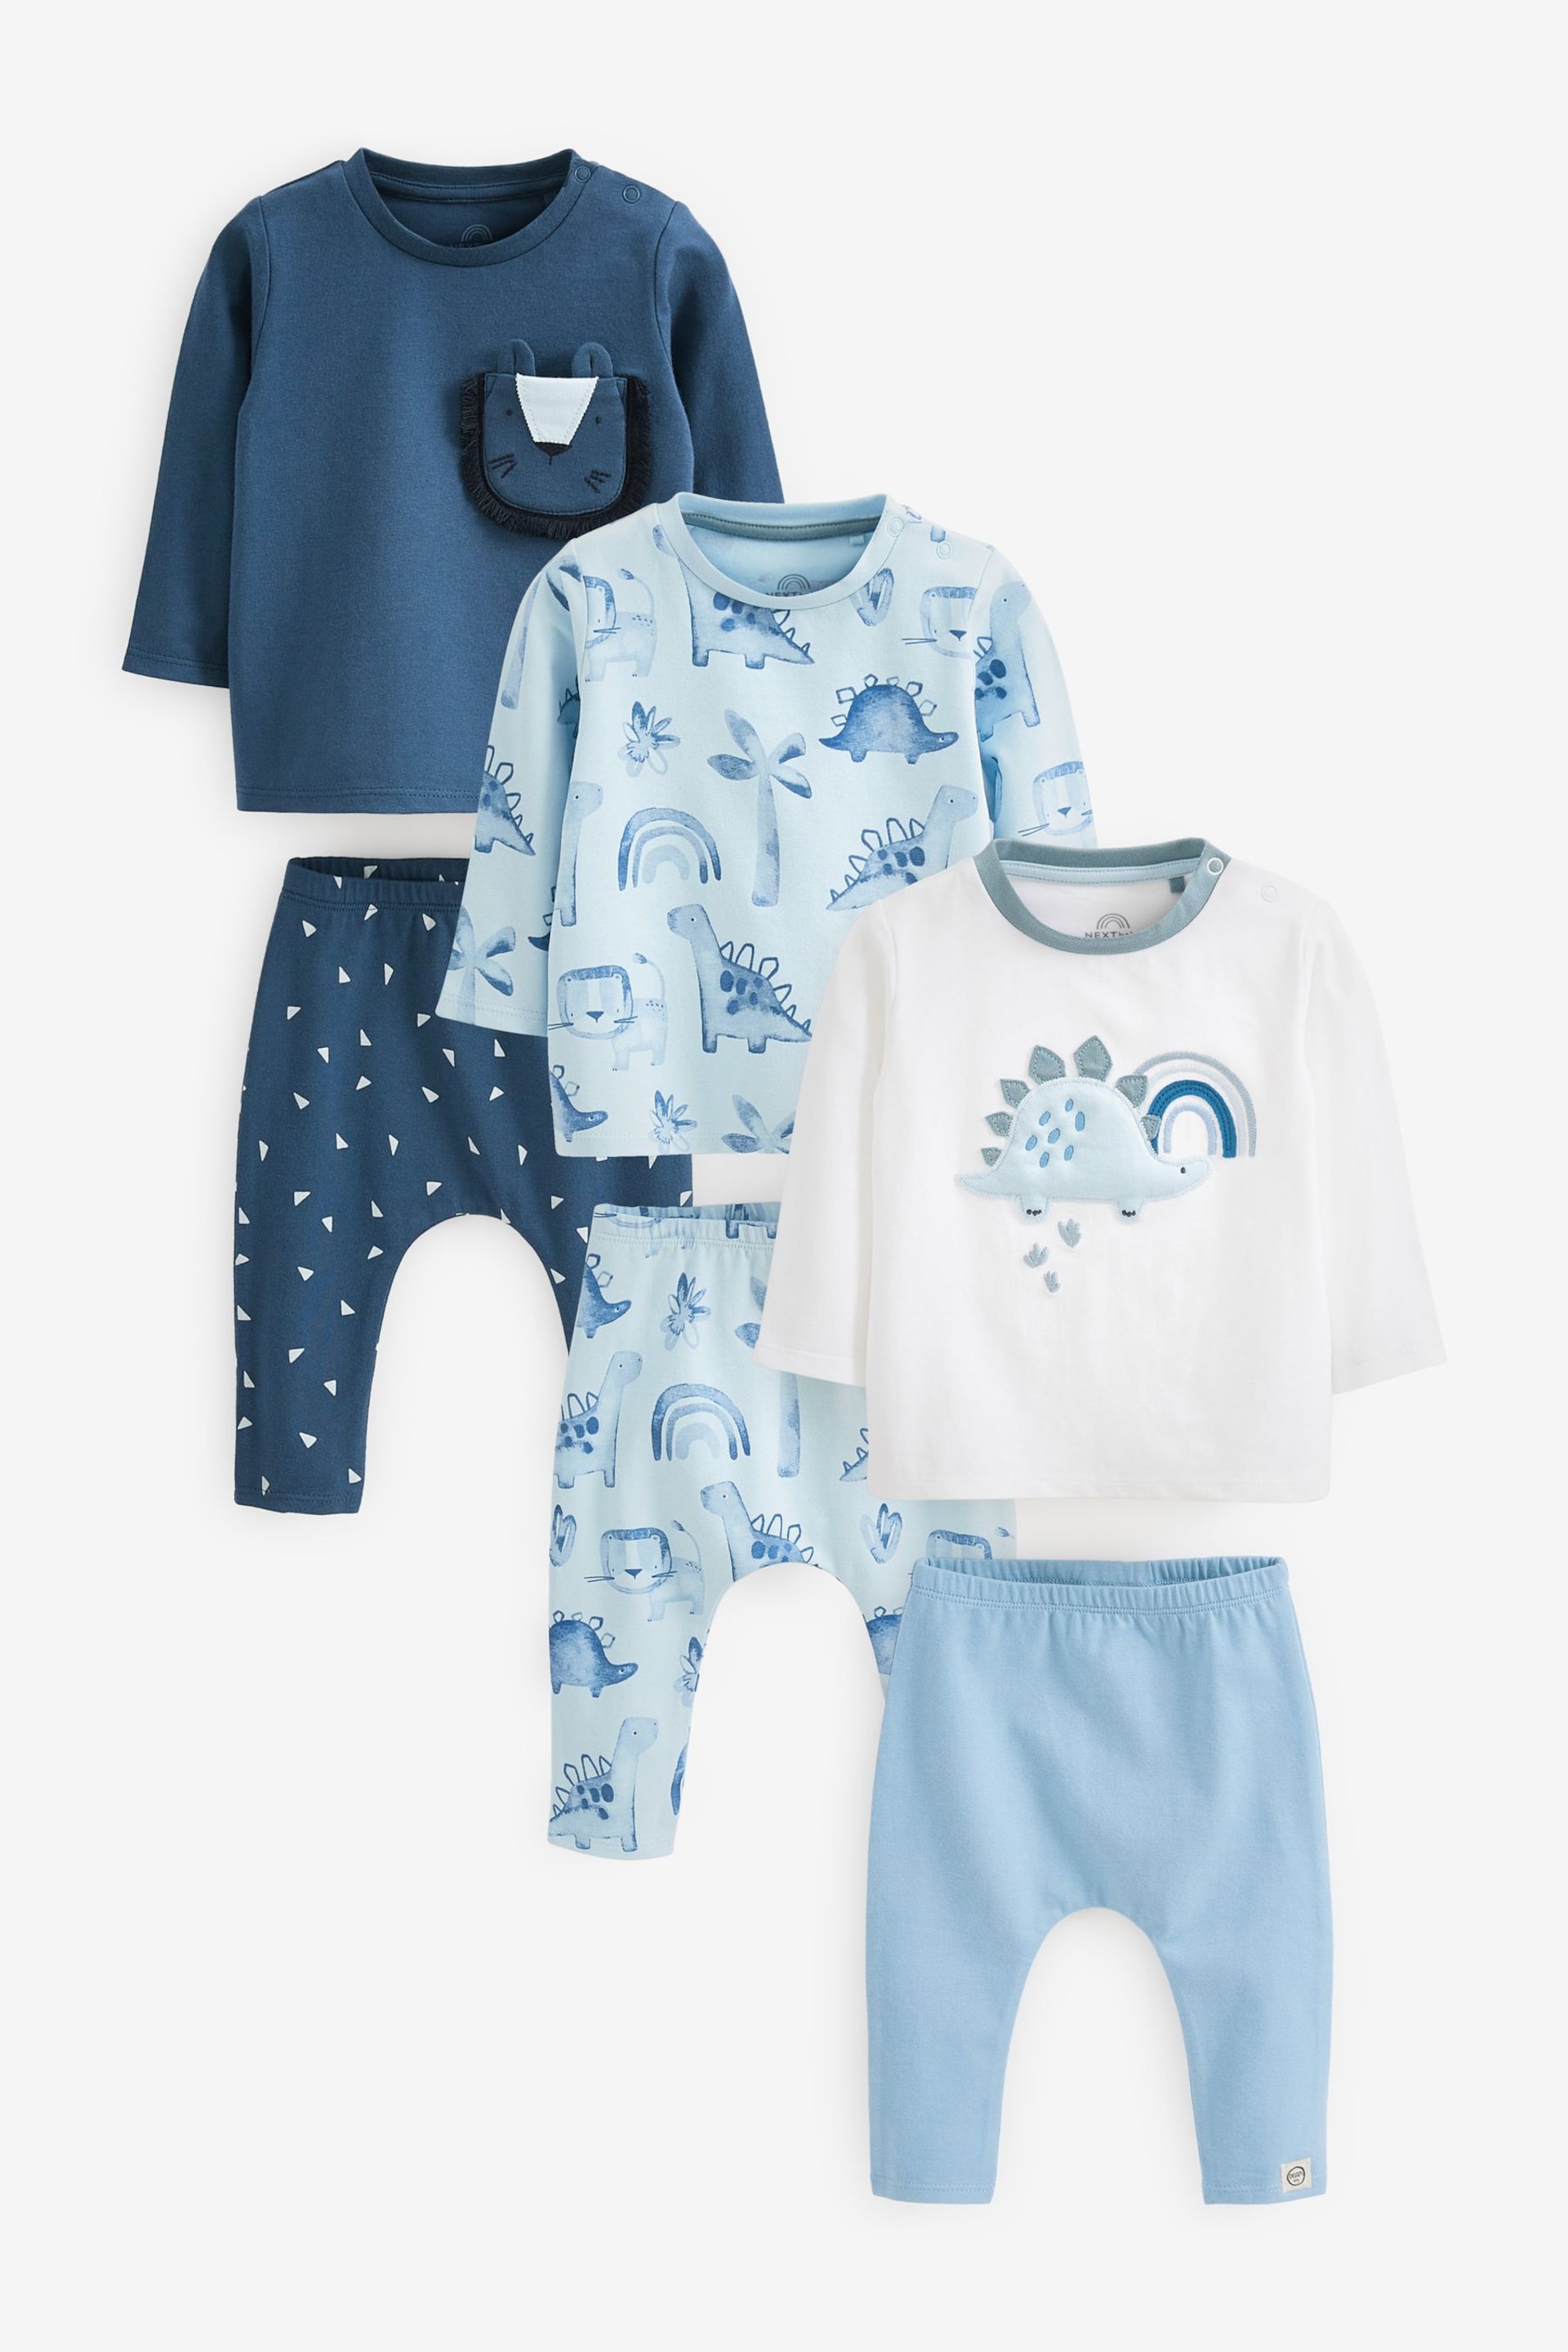 Blue dinosaur Baby T-Shirts And Leggings Set 6 Pack - Image 1 of 5